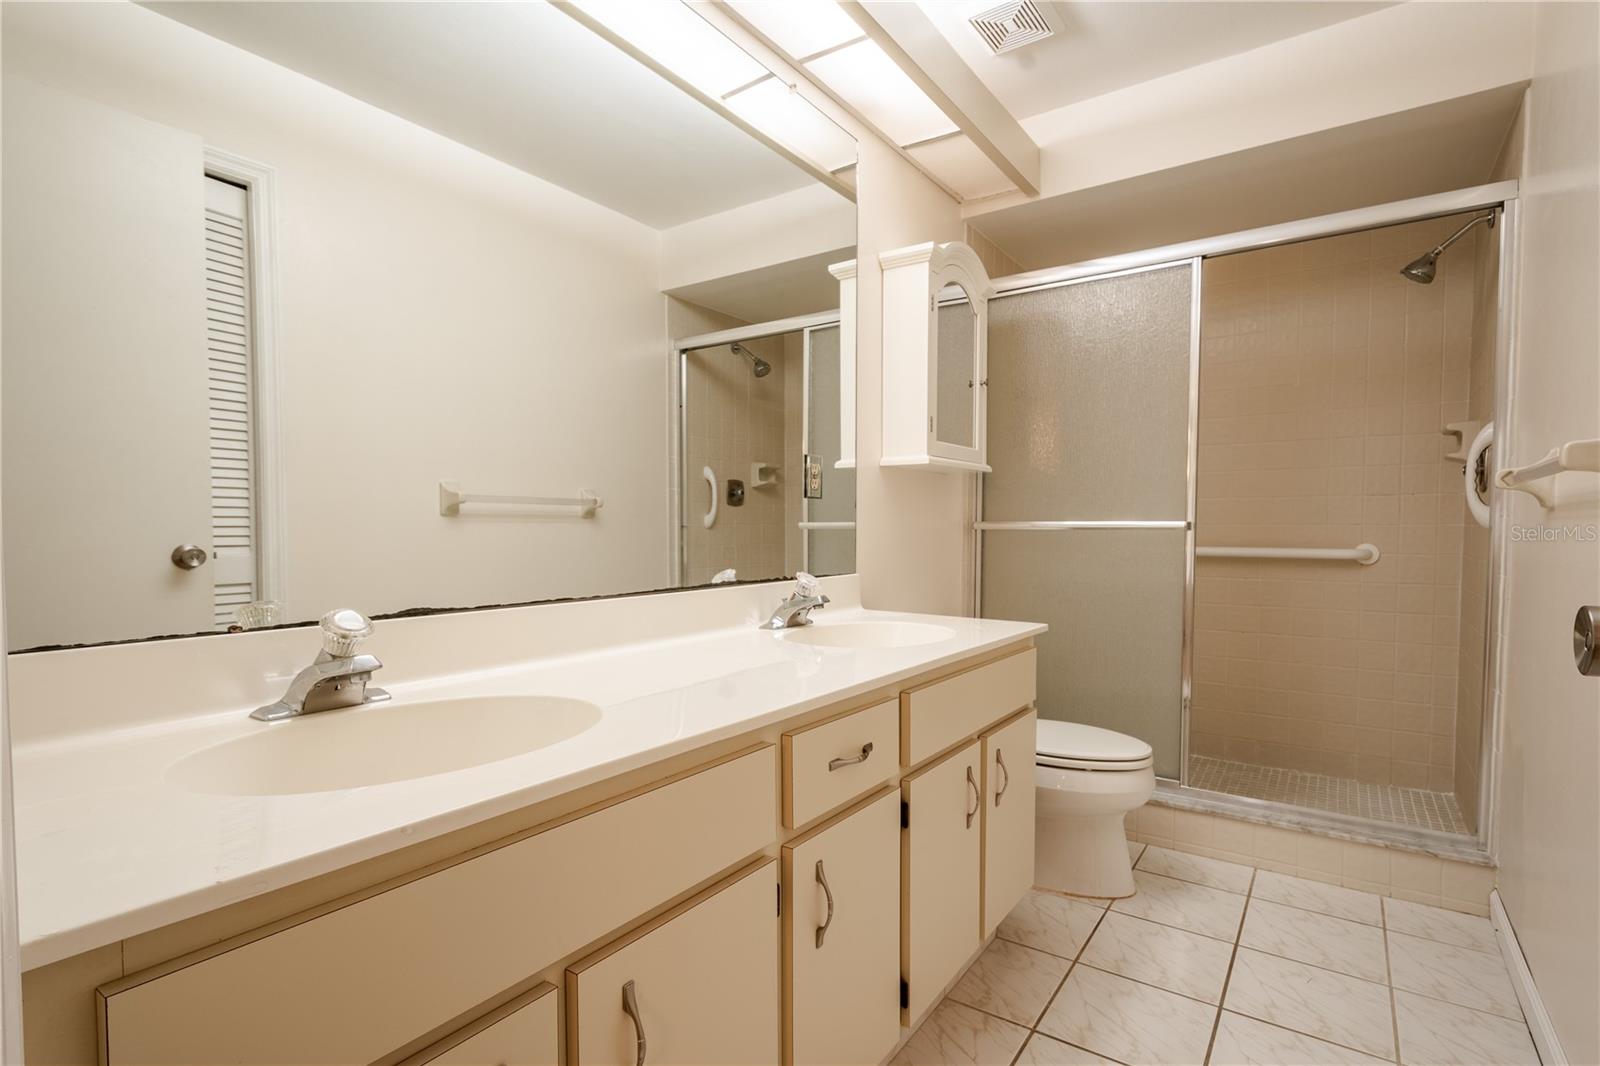 he ensuite bath includes a walk-in shower, a dual sink vanity with storage, and a linen closet.